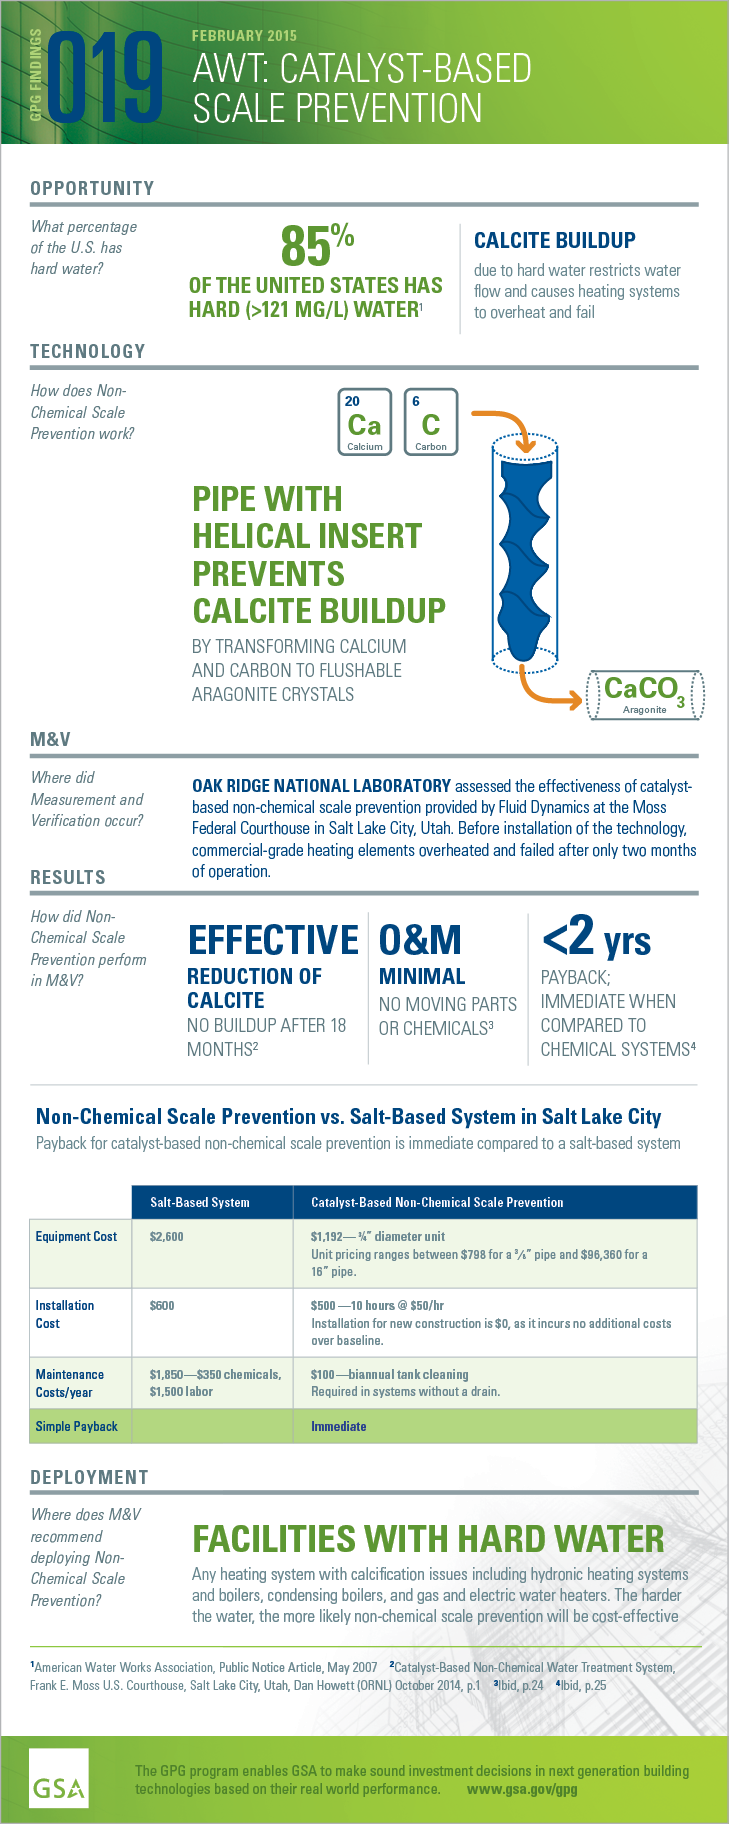 Download the PDF version of the full-sized infographic for GPG019 Catalyst-Based Scale Prevention.